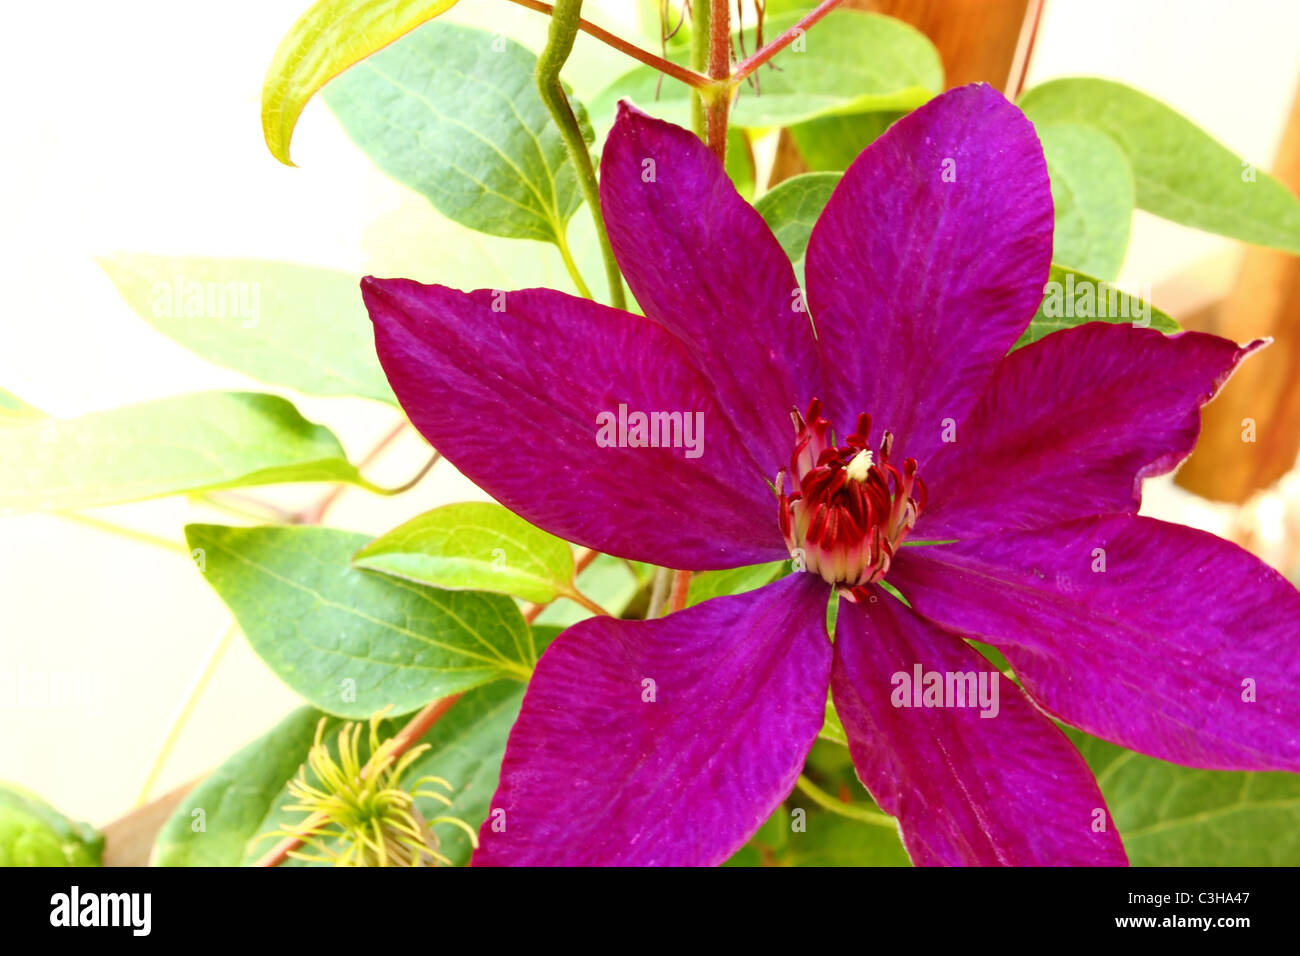 Flower of clematis with some foliage isolated on white Stock Photo